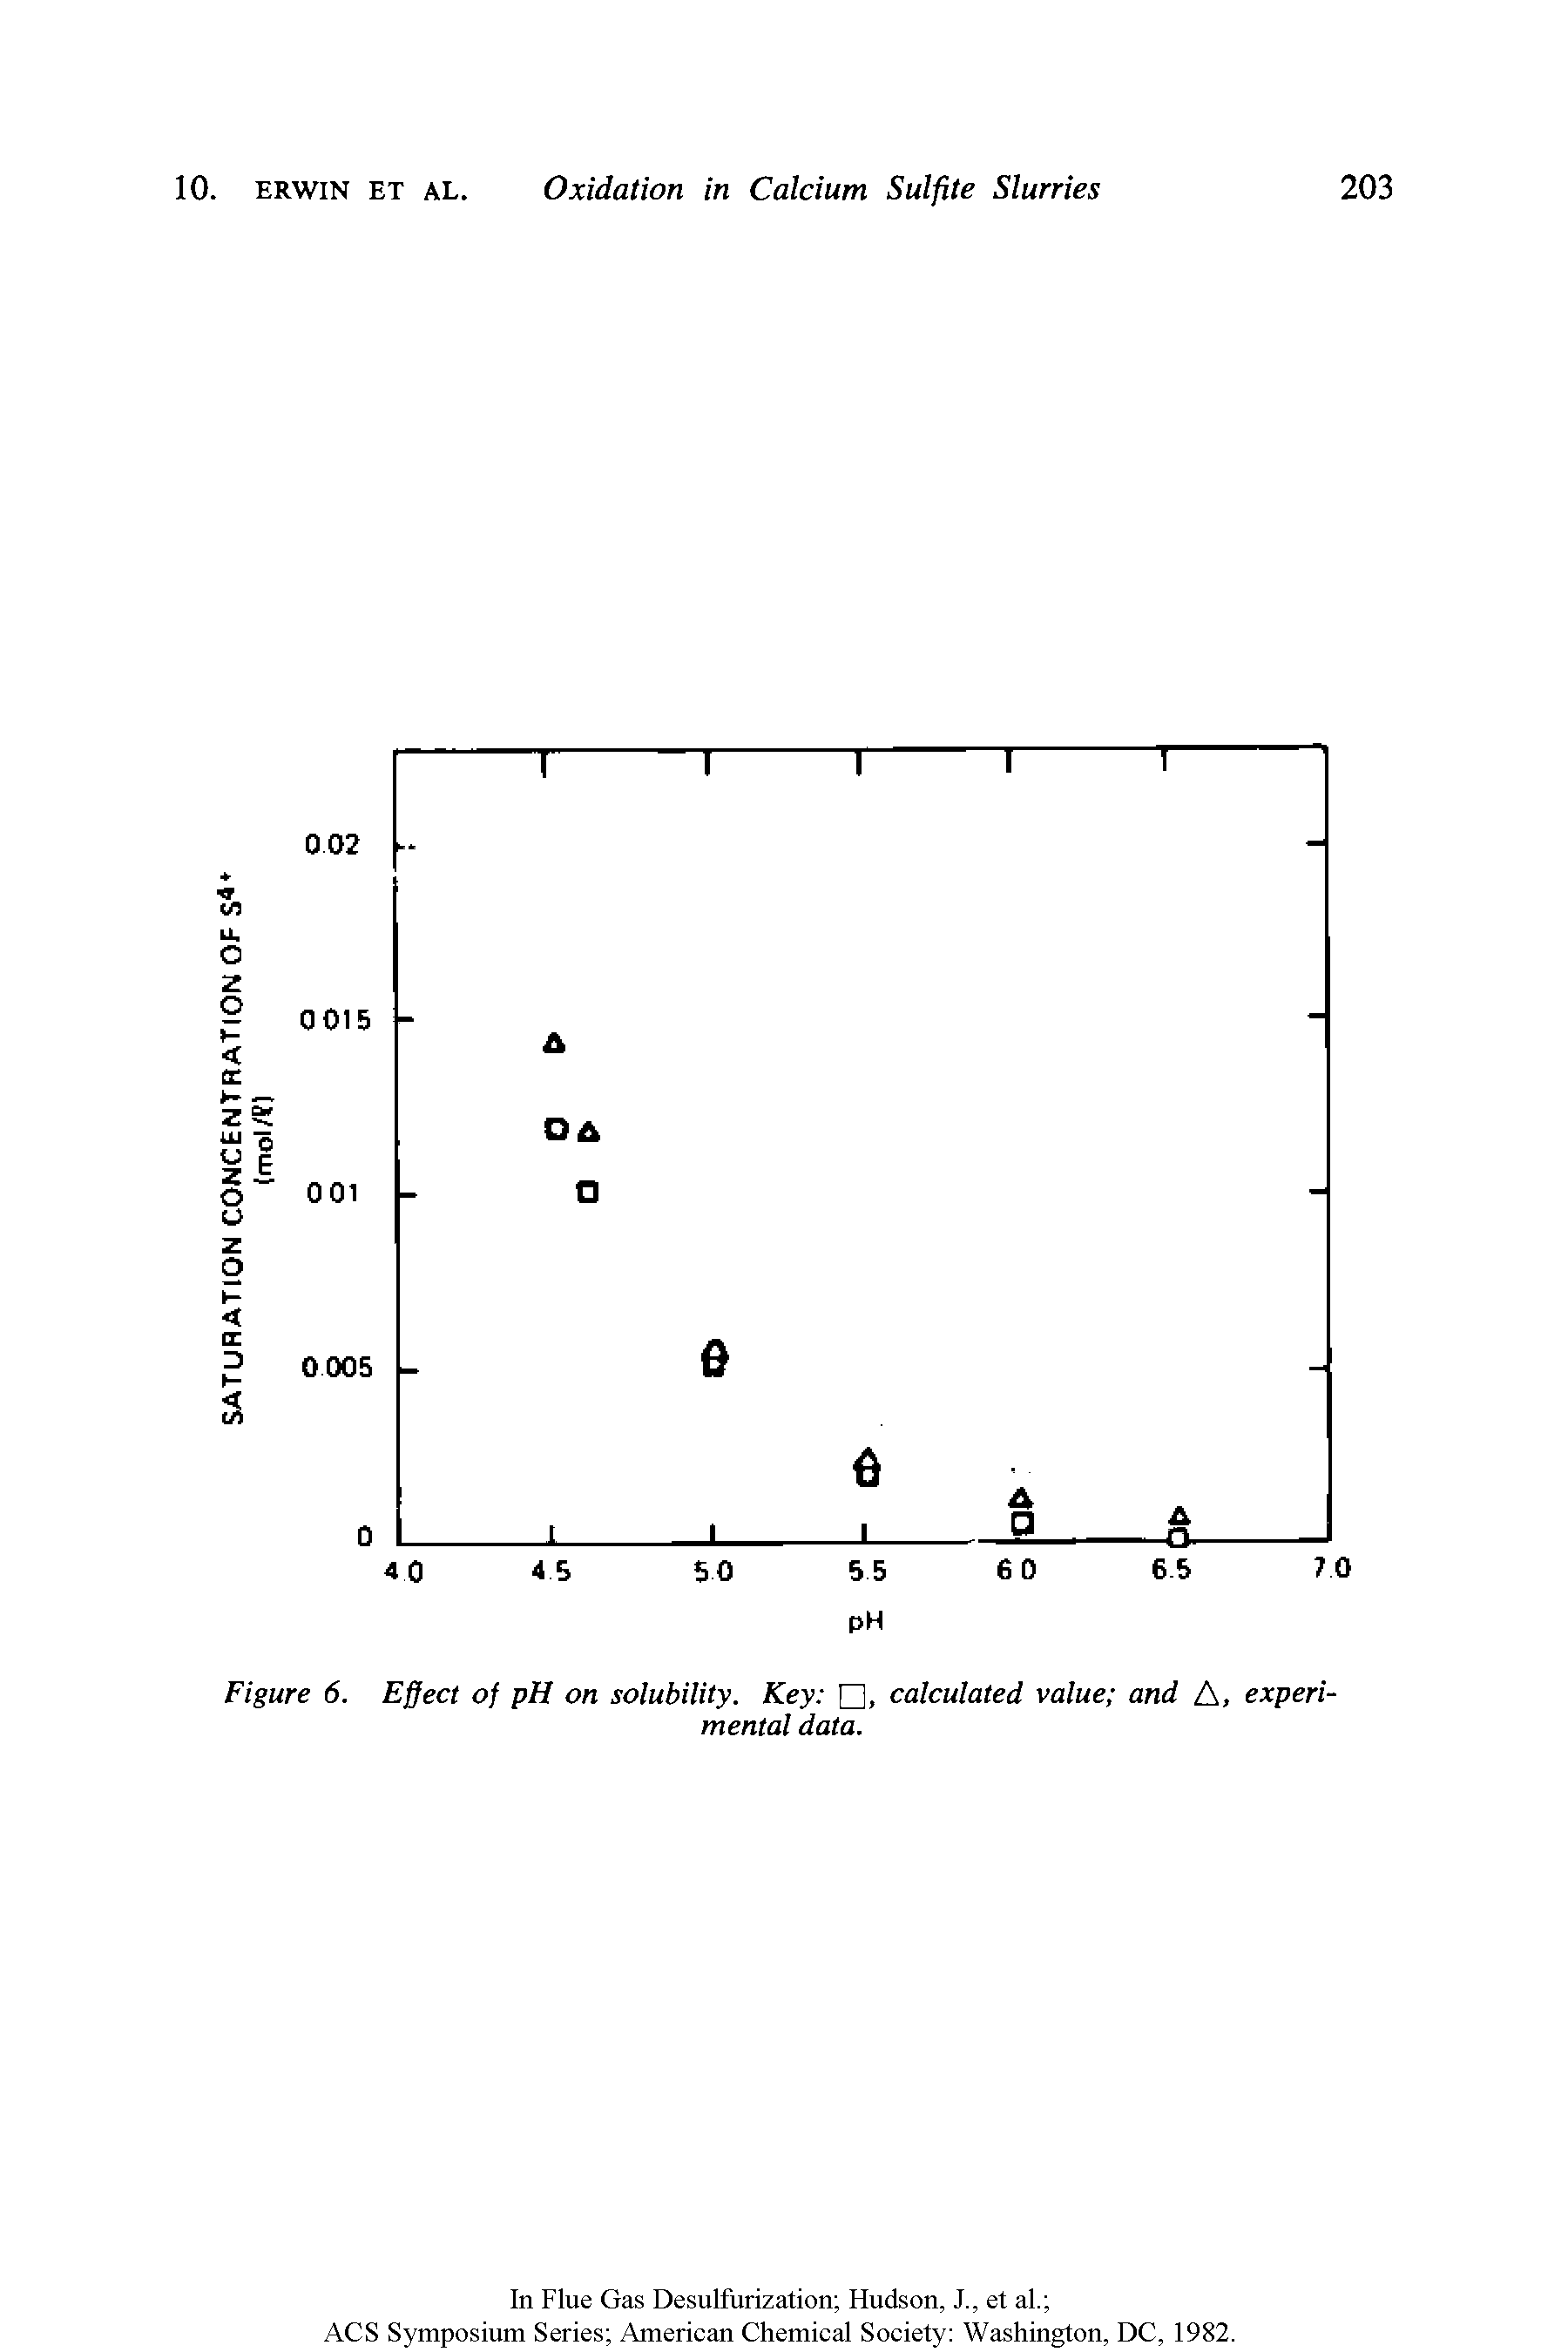 Figure 6. Effect of pH on solubility. Key , calculated value and A, experimental data.